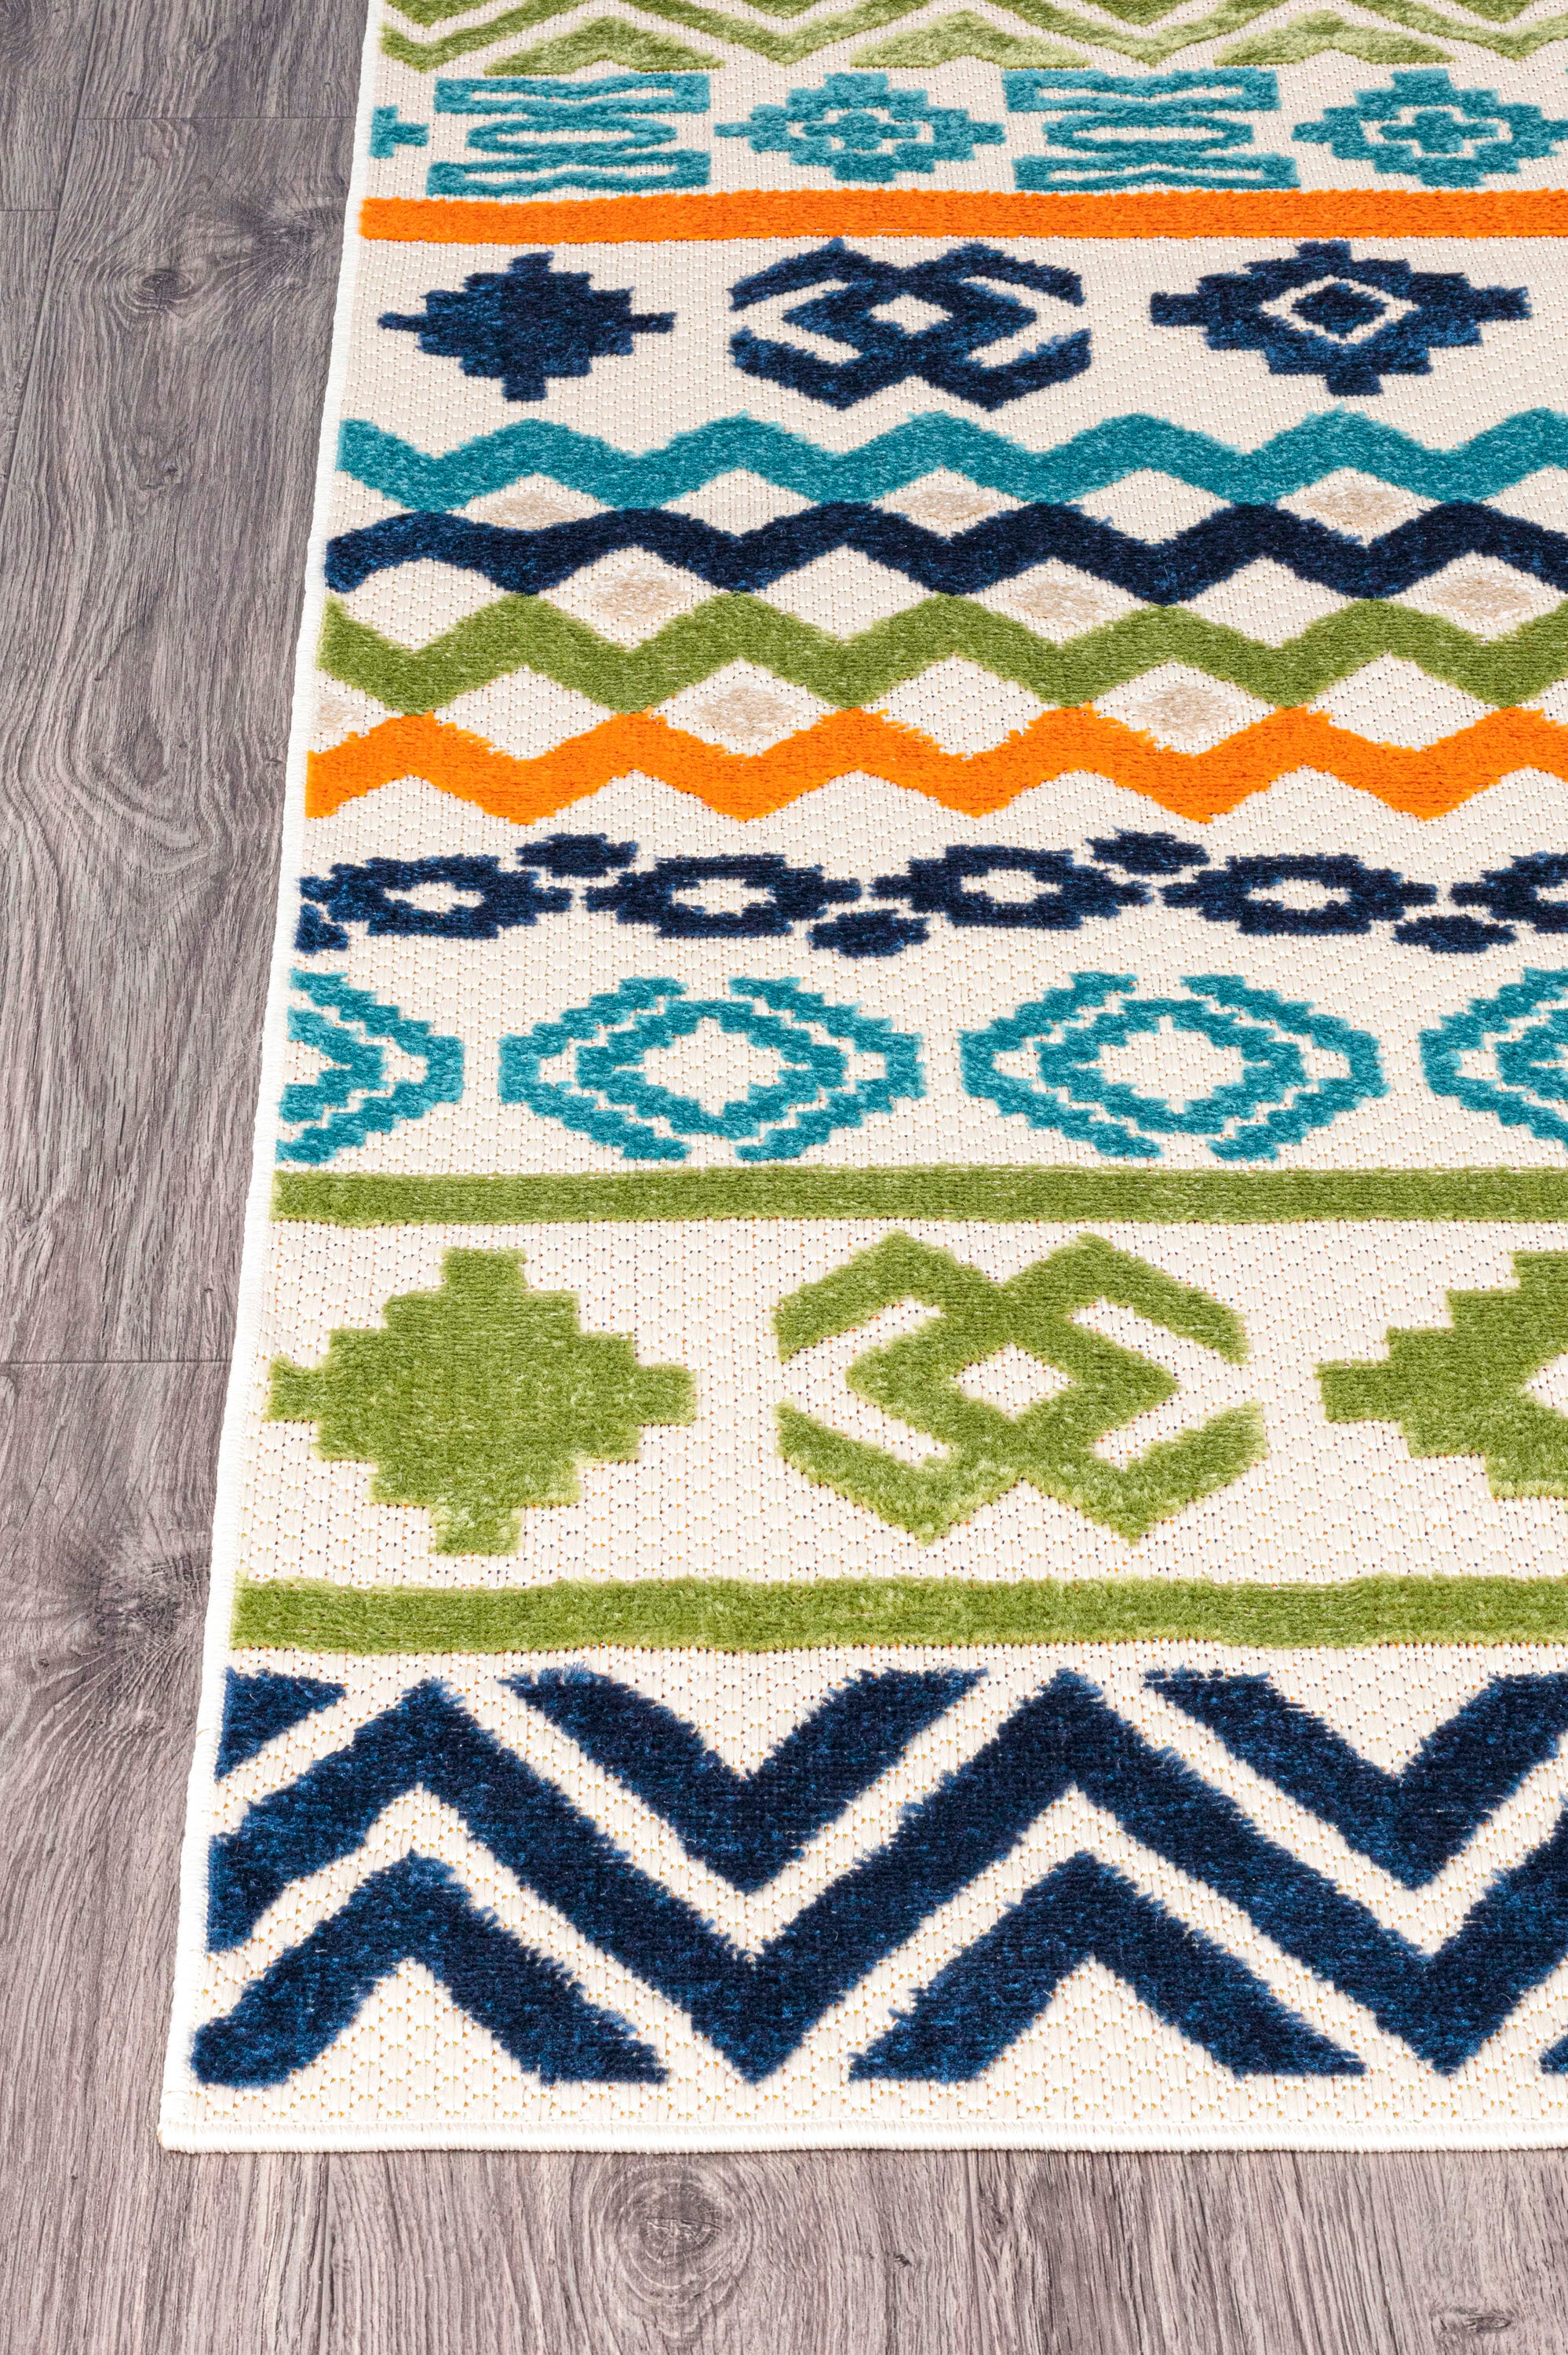 World Rug Gallery X 7 Area at Rug 2 department Rugs Indoor/Outdoor Geometric the in